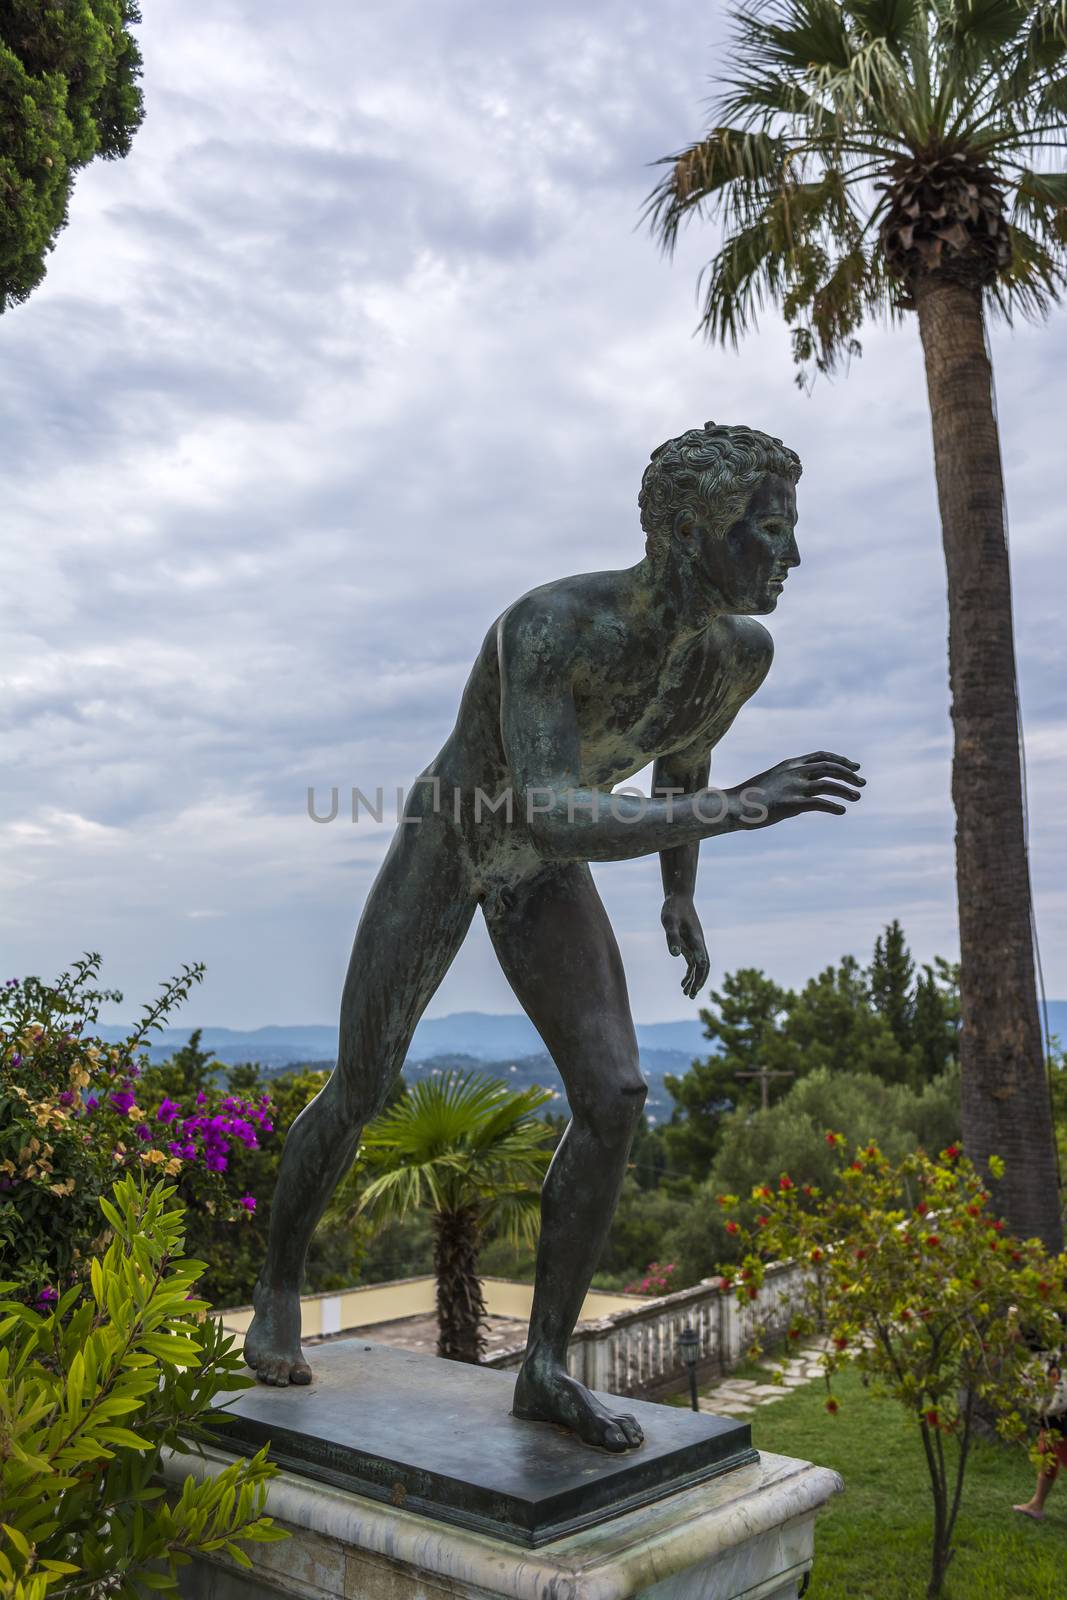 Achilleion palace, Corfu, Greece - August 24, 2018: Bronze runner on Achilleion palace of princess Sissy in Corfu, Greece